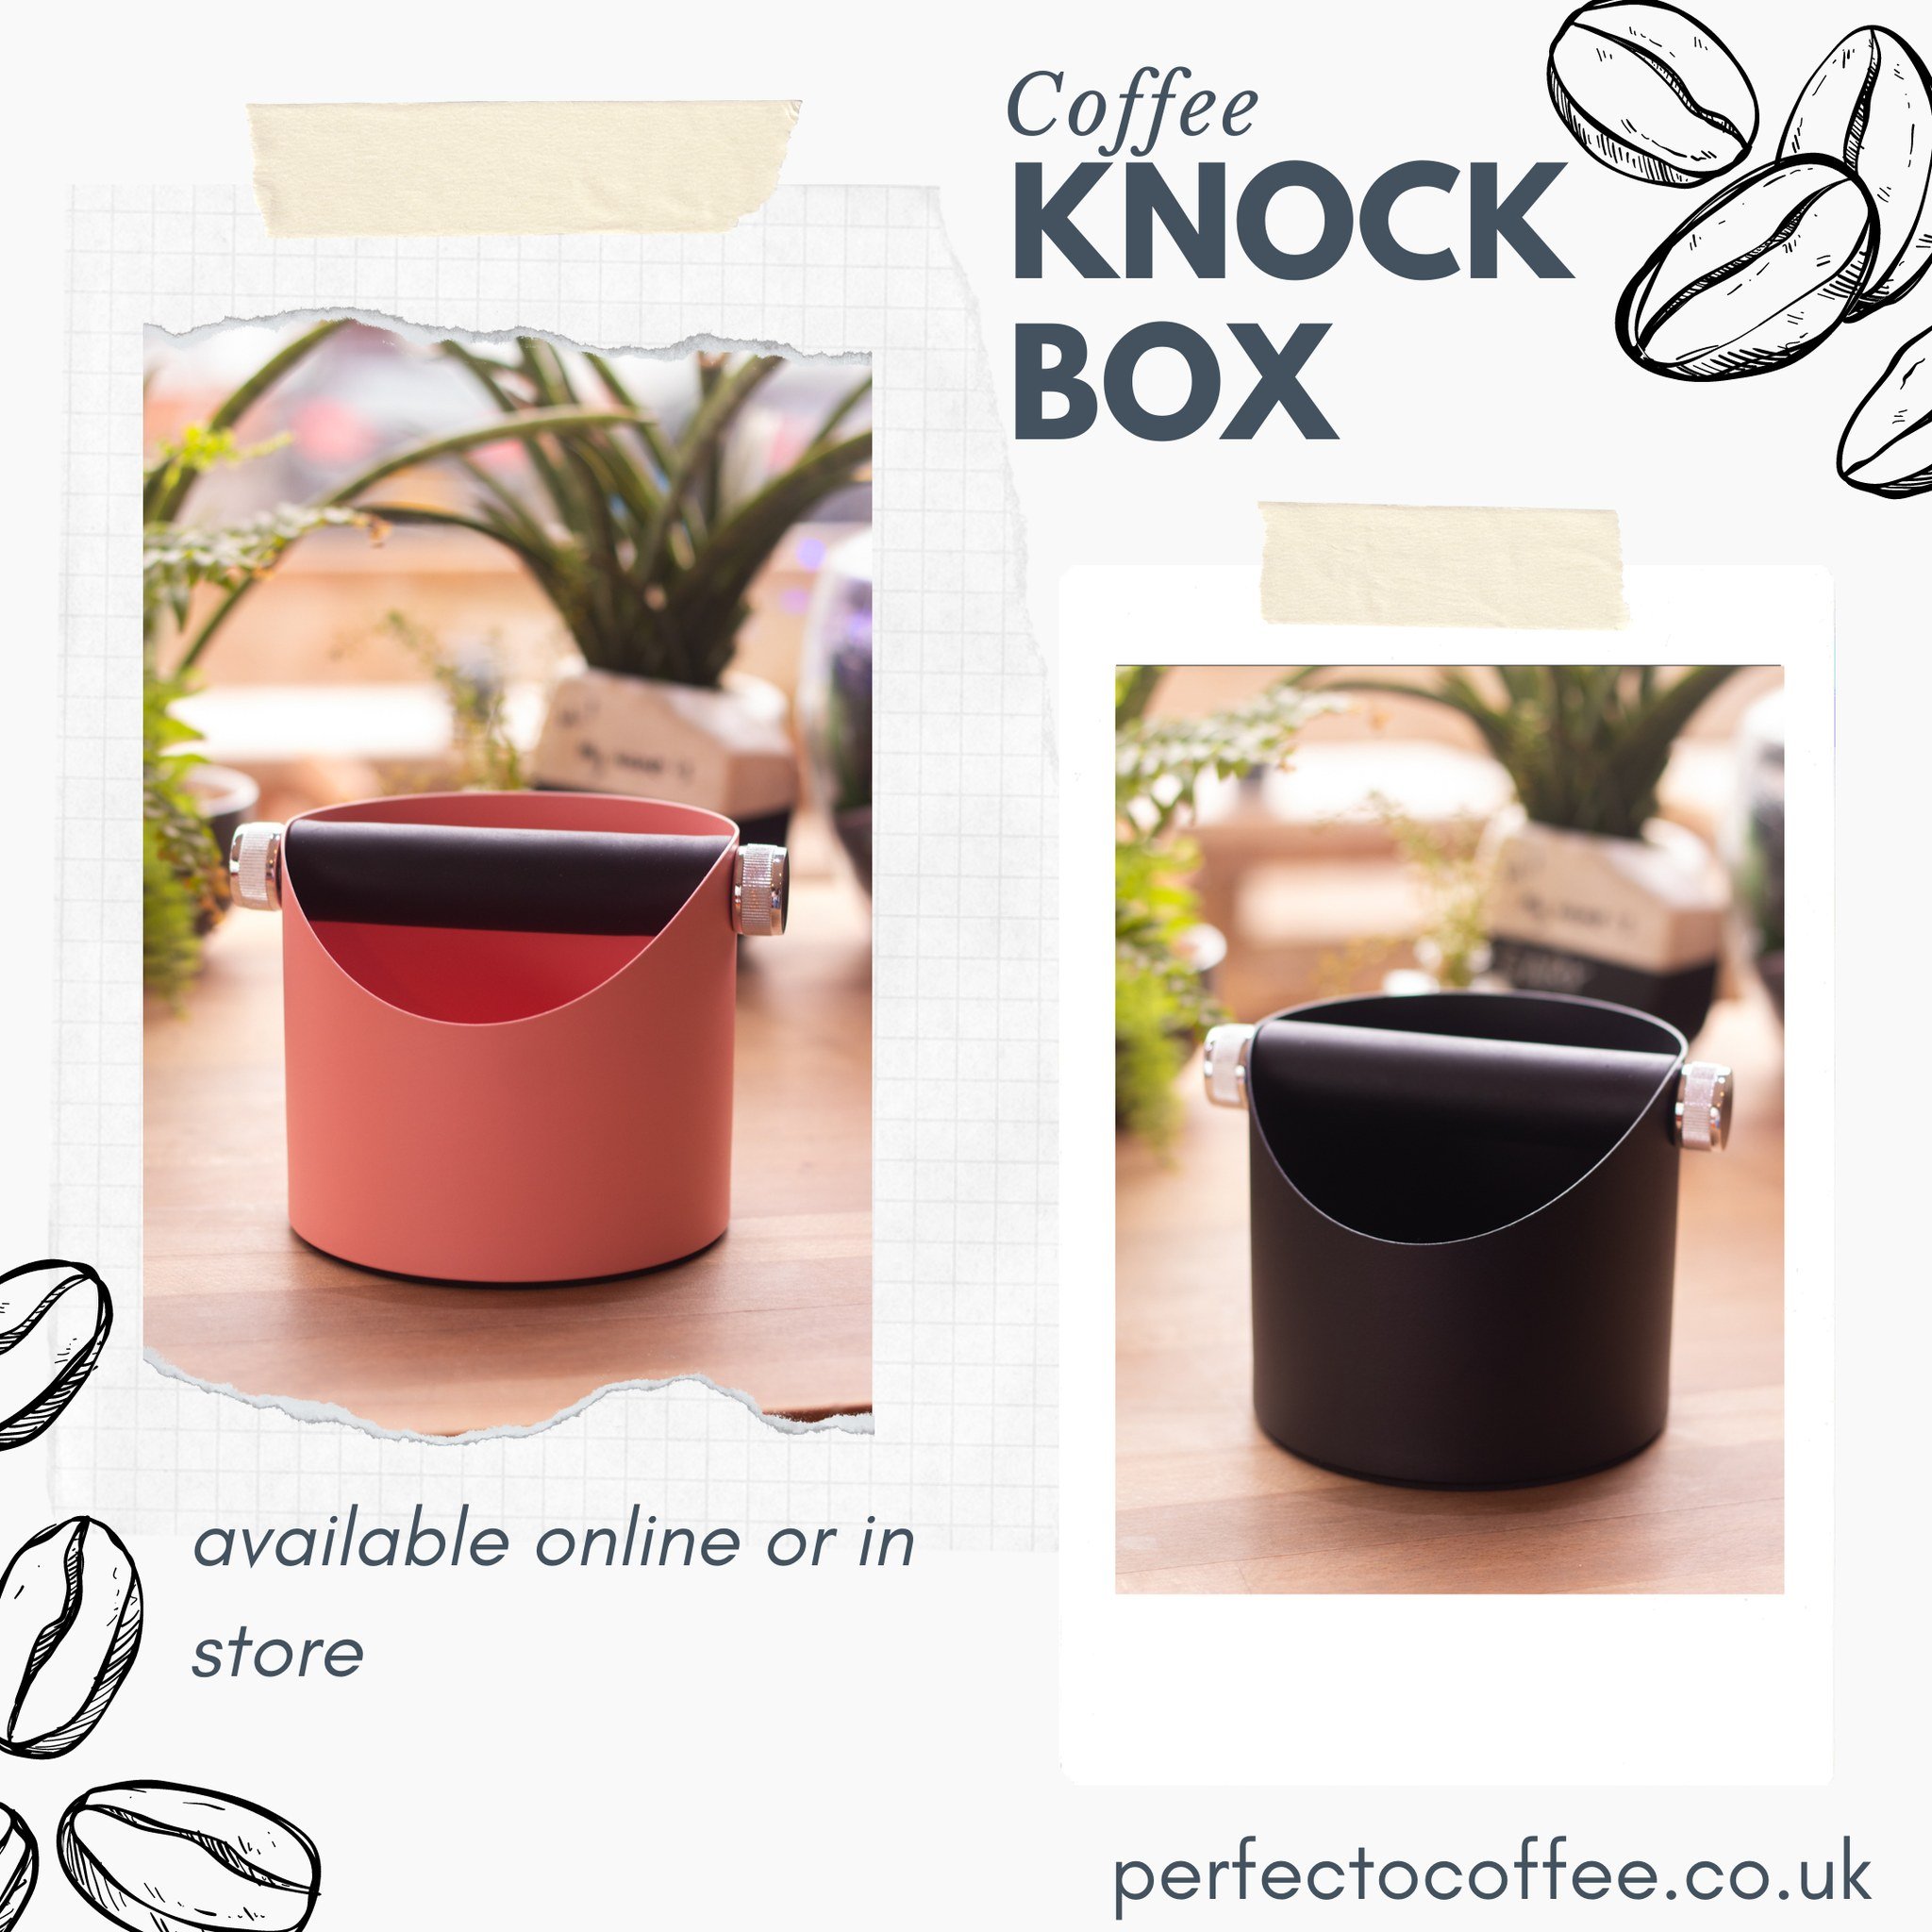 Oh my goodness, have you seen the super cute coffee knock box!? 😍🐝
They come in 3 unique colours that are just so adorable! Perfect addition to your coffee setup!🌈☕️
 #CoffeeLover #MustHaveAccessory #SoCute